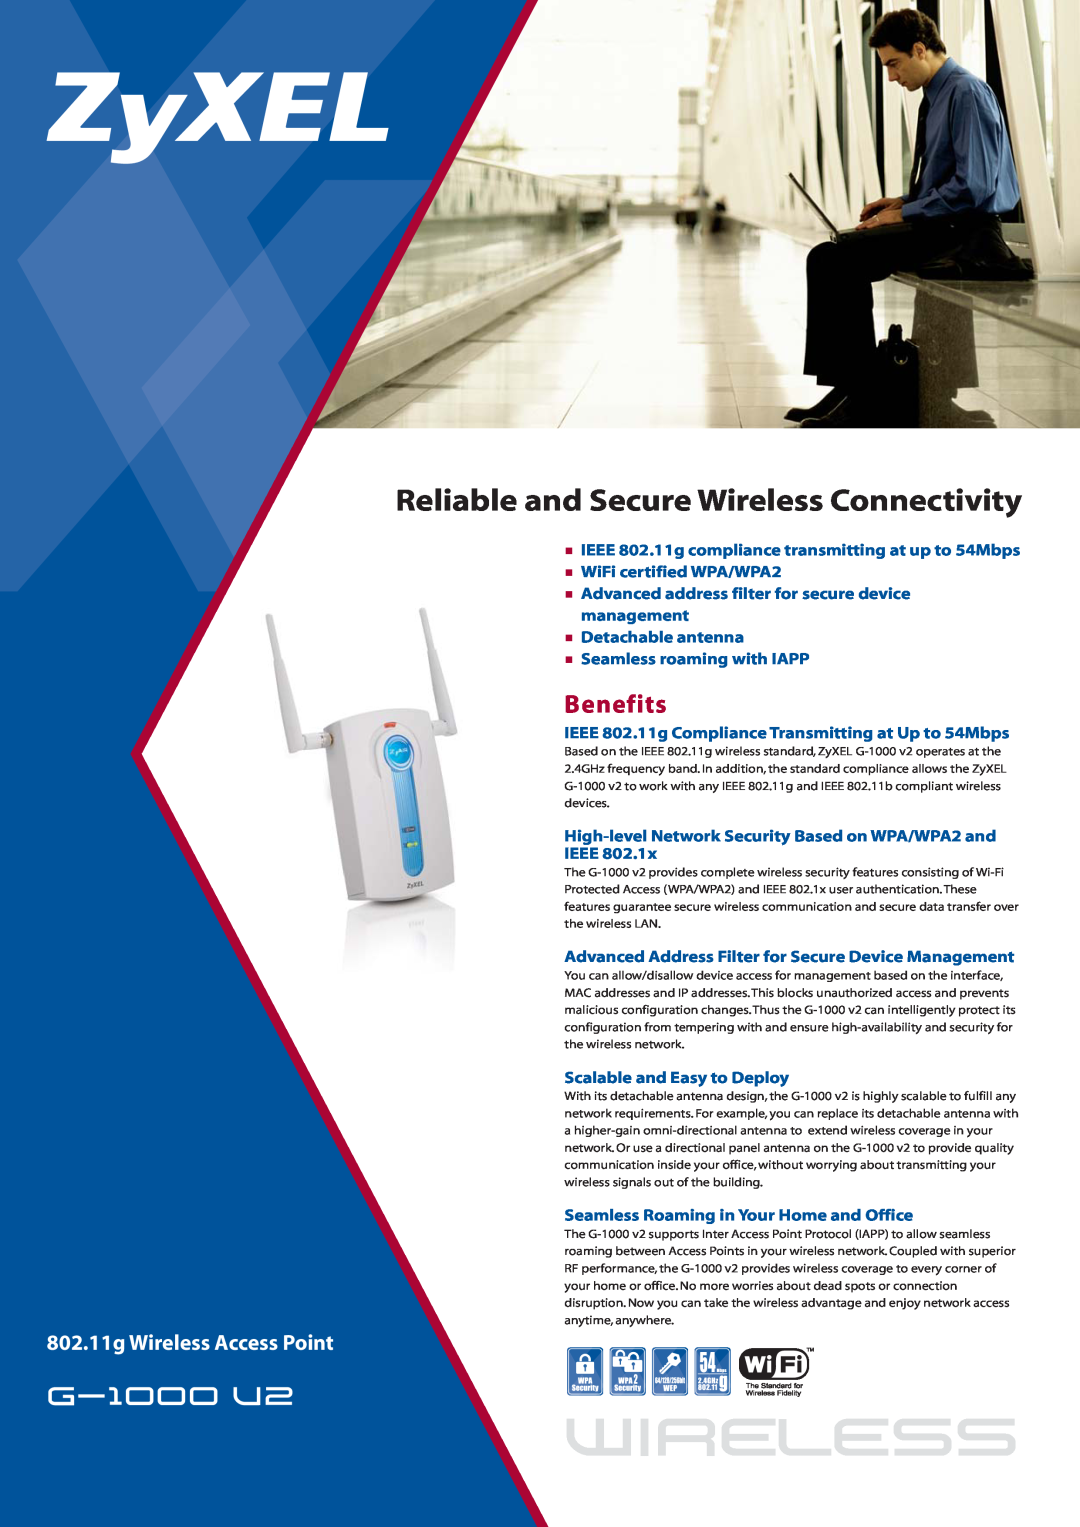 ZyXEL Communications G-1000 U2 manual Benefits, wireless, Reliable and Secure Wireless Connectivity, g-1000v2 